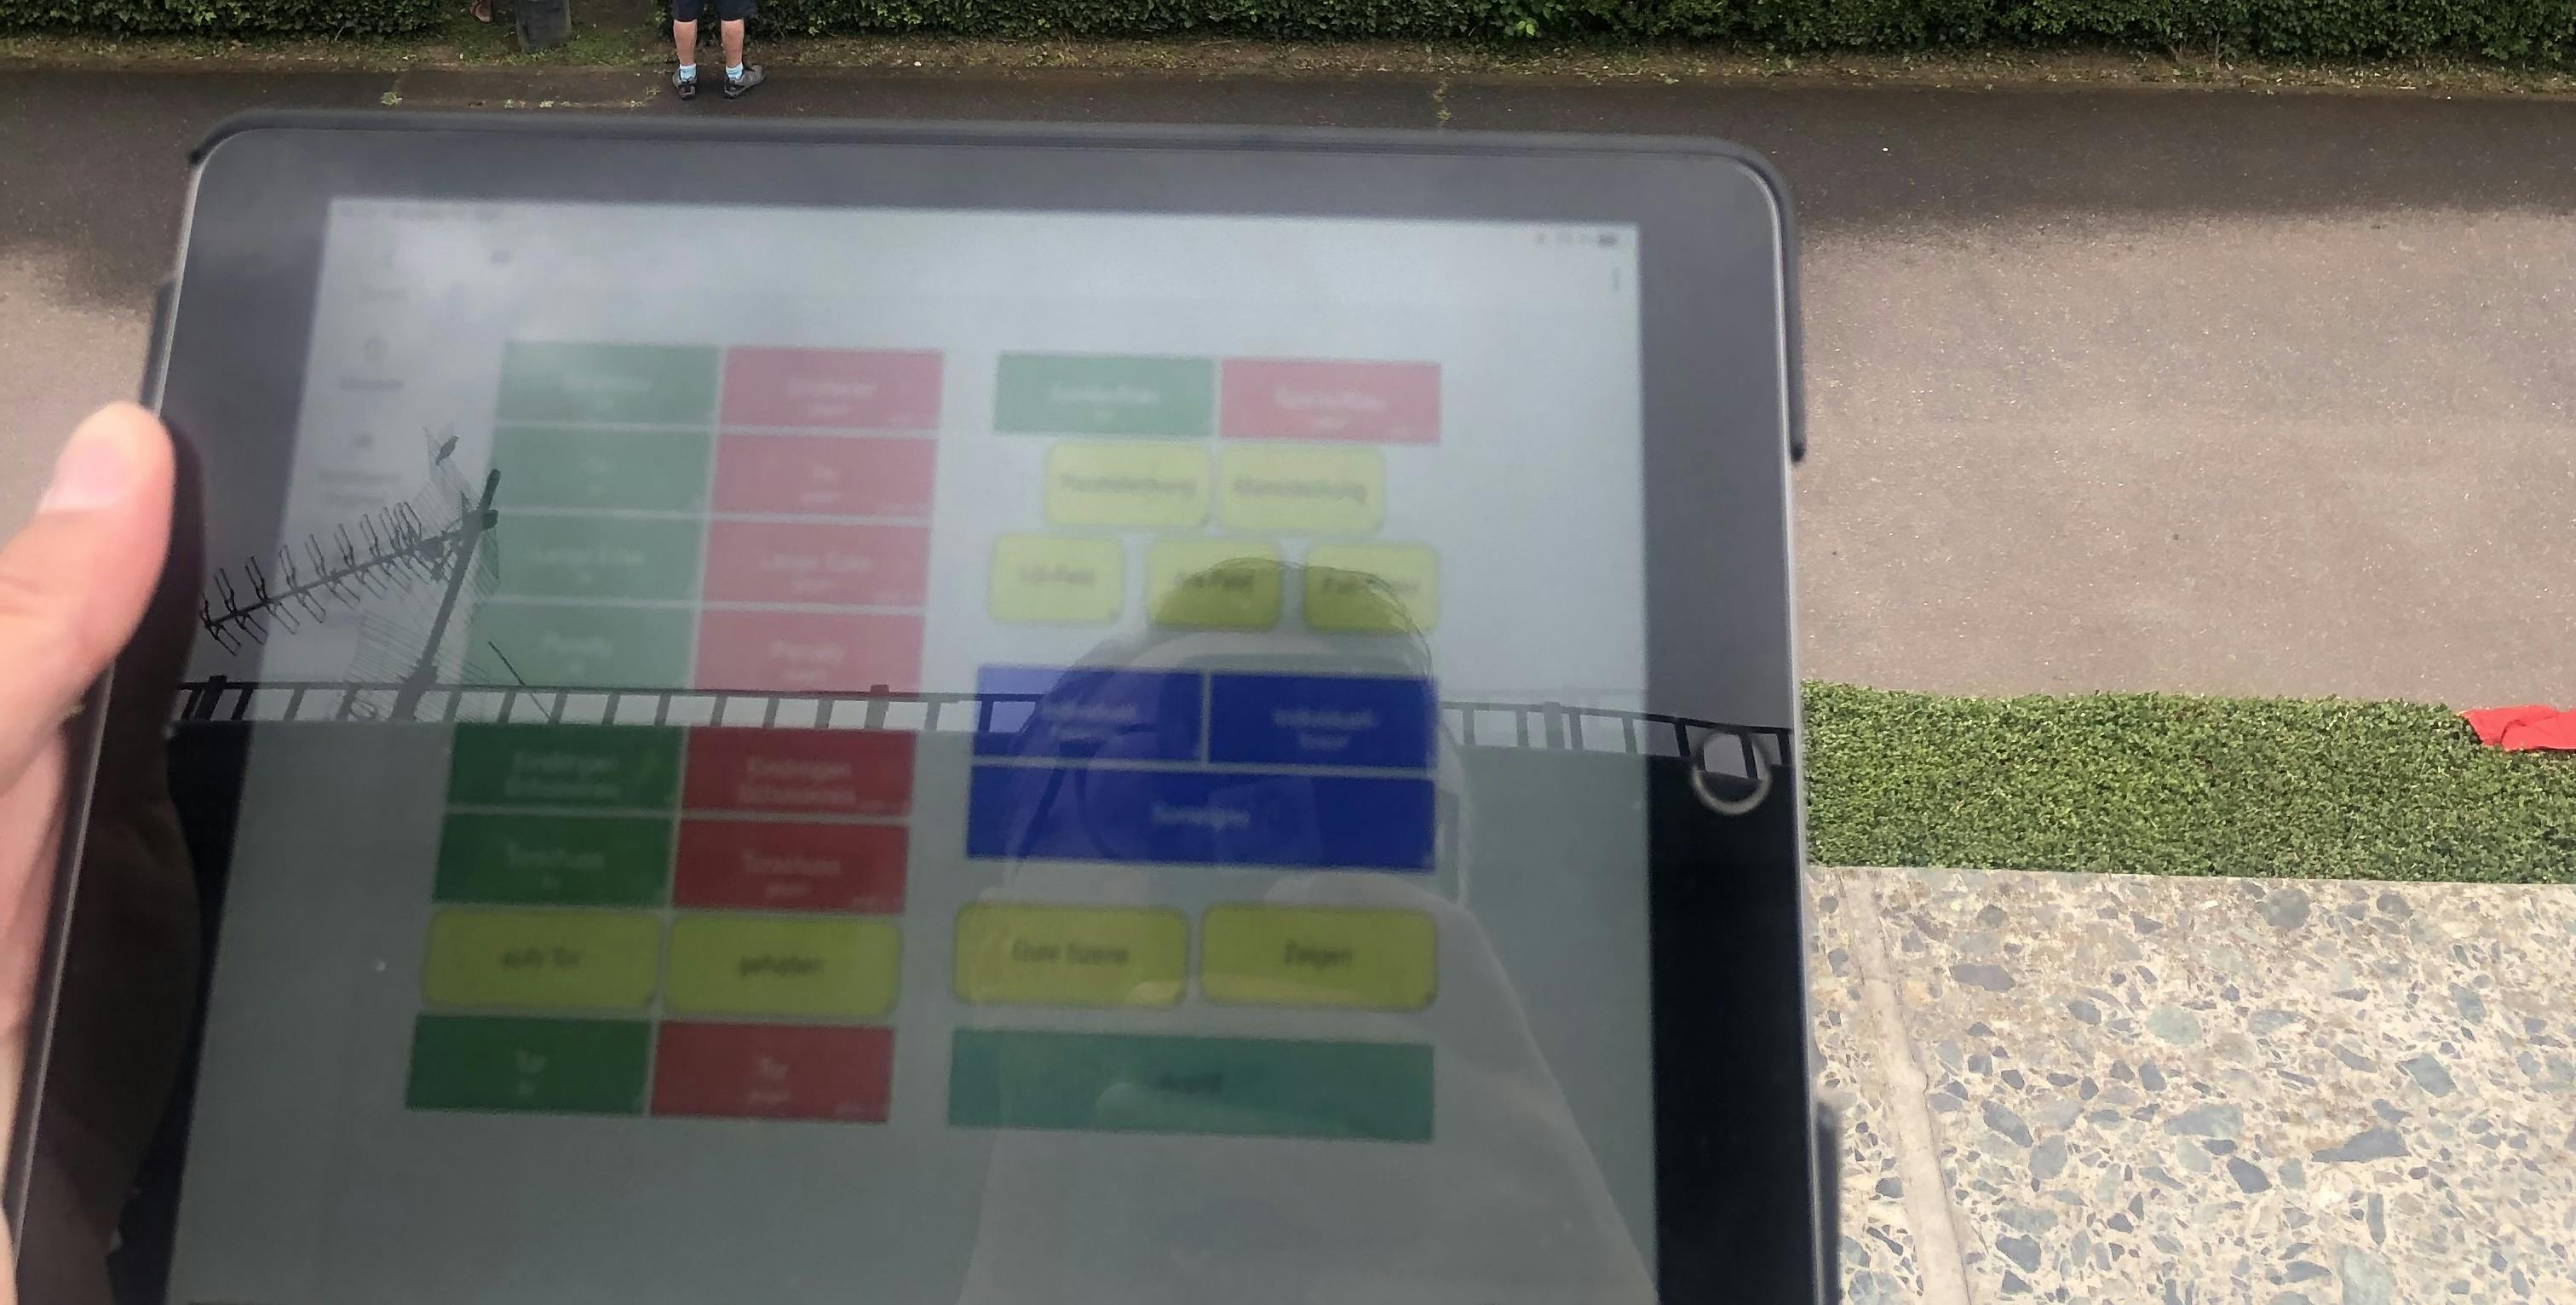 Videoanalysis with tablet on site